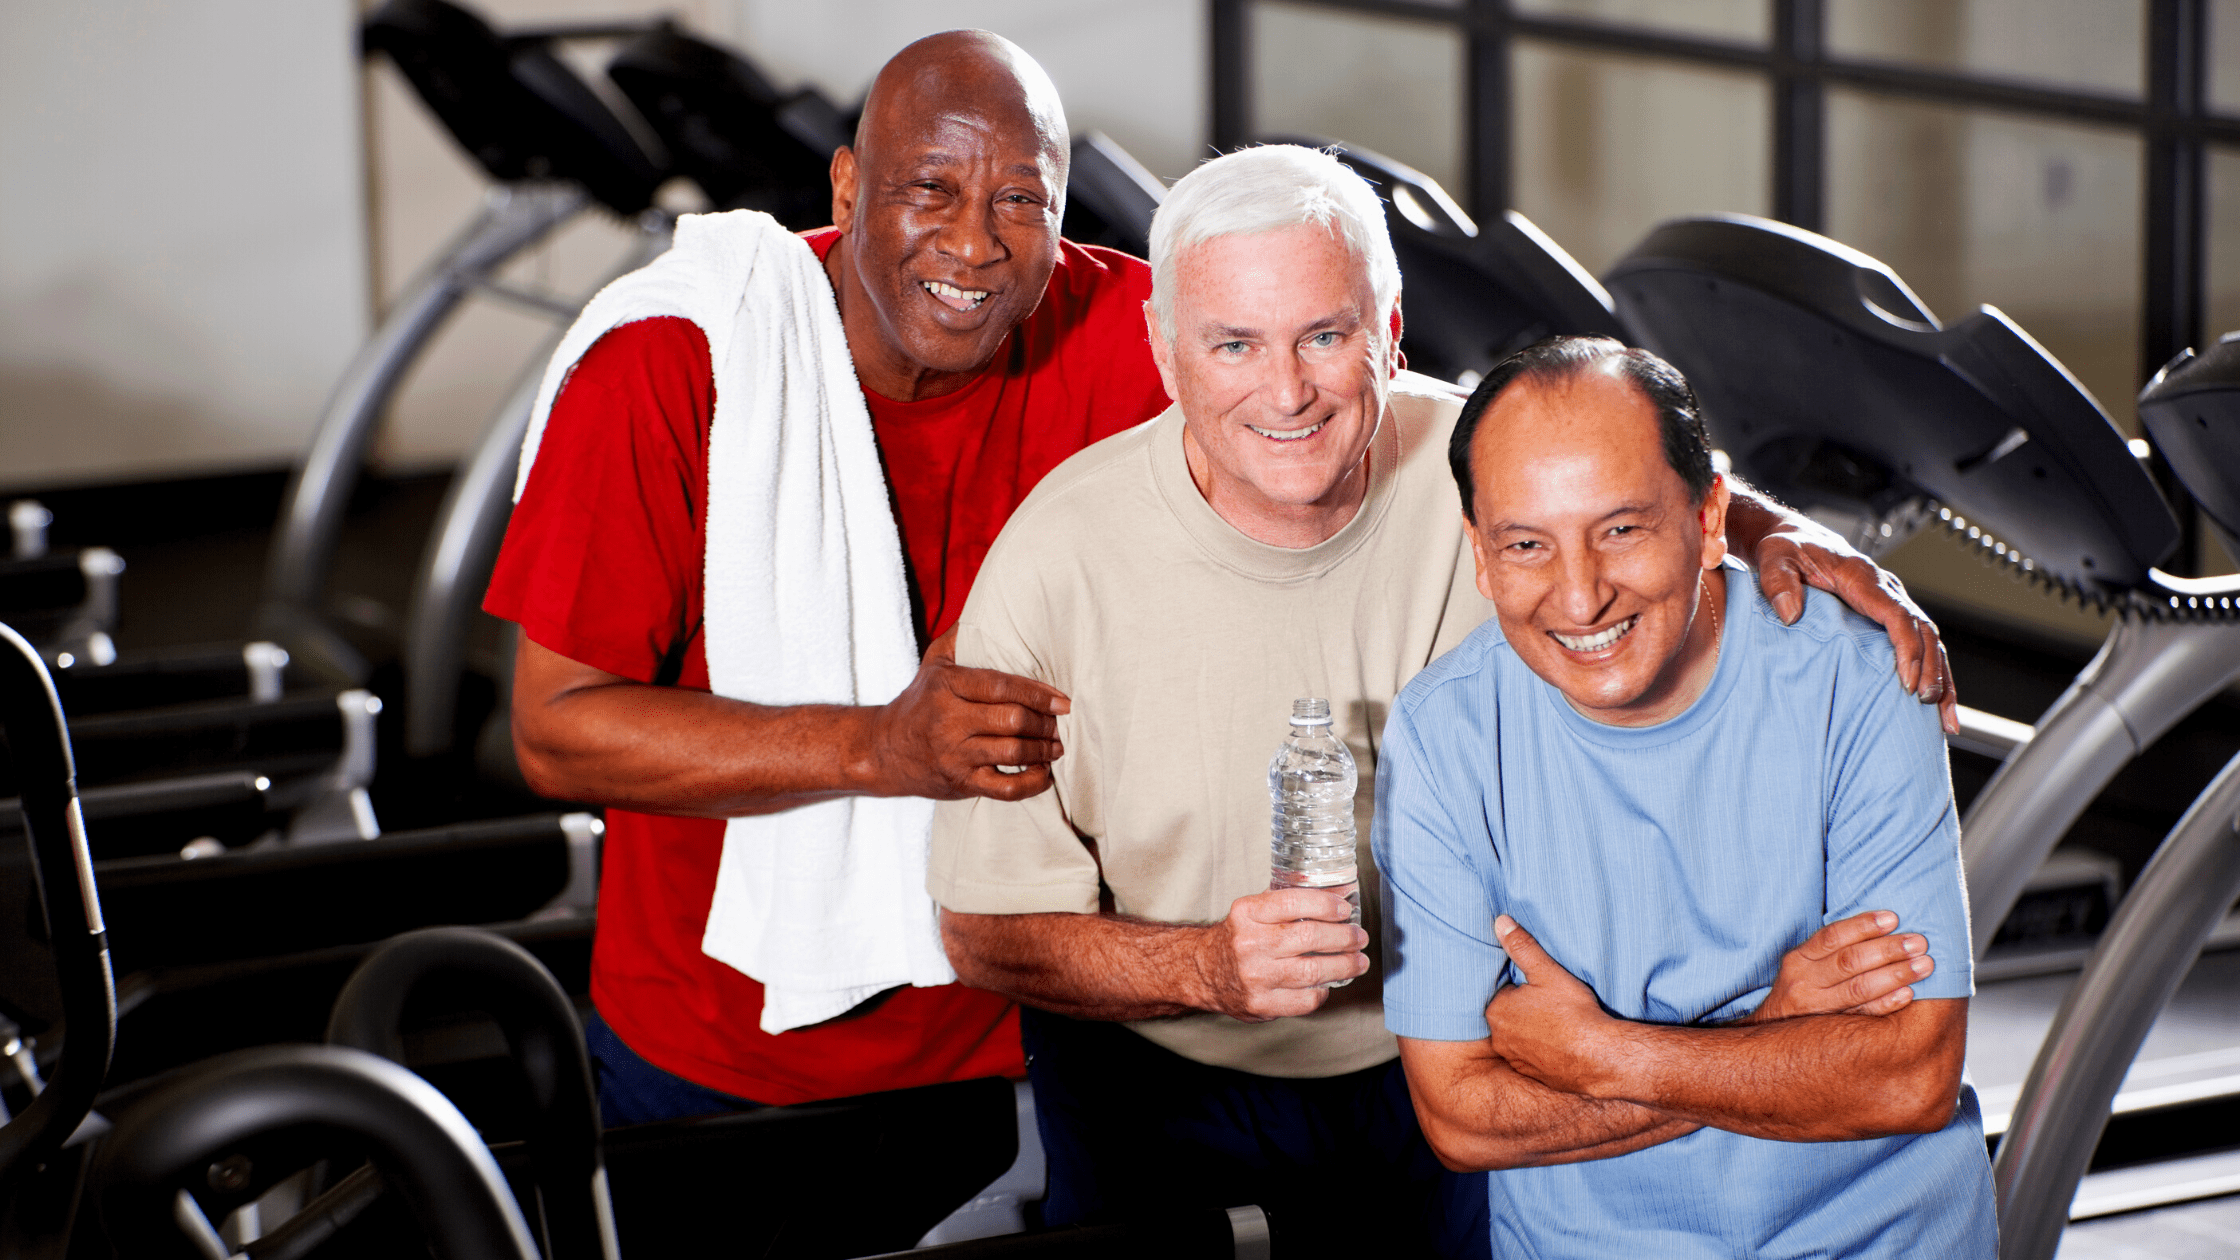 A three active aging men in the gym